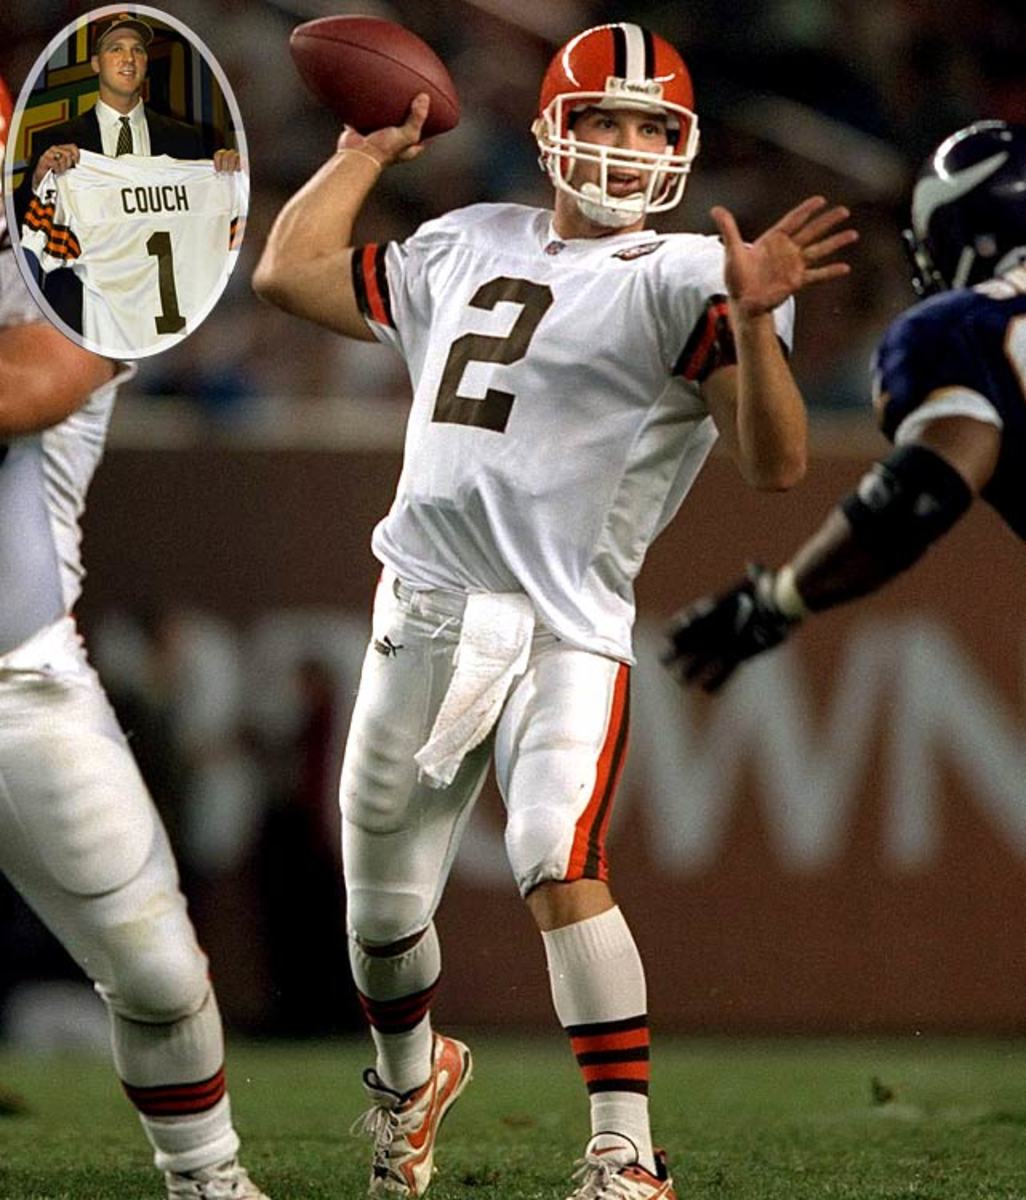 1999 - Tim Couch